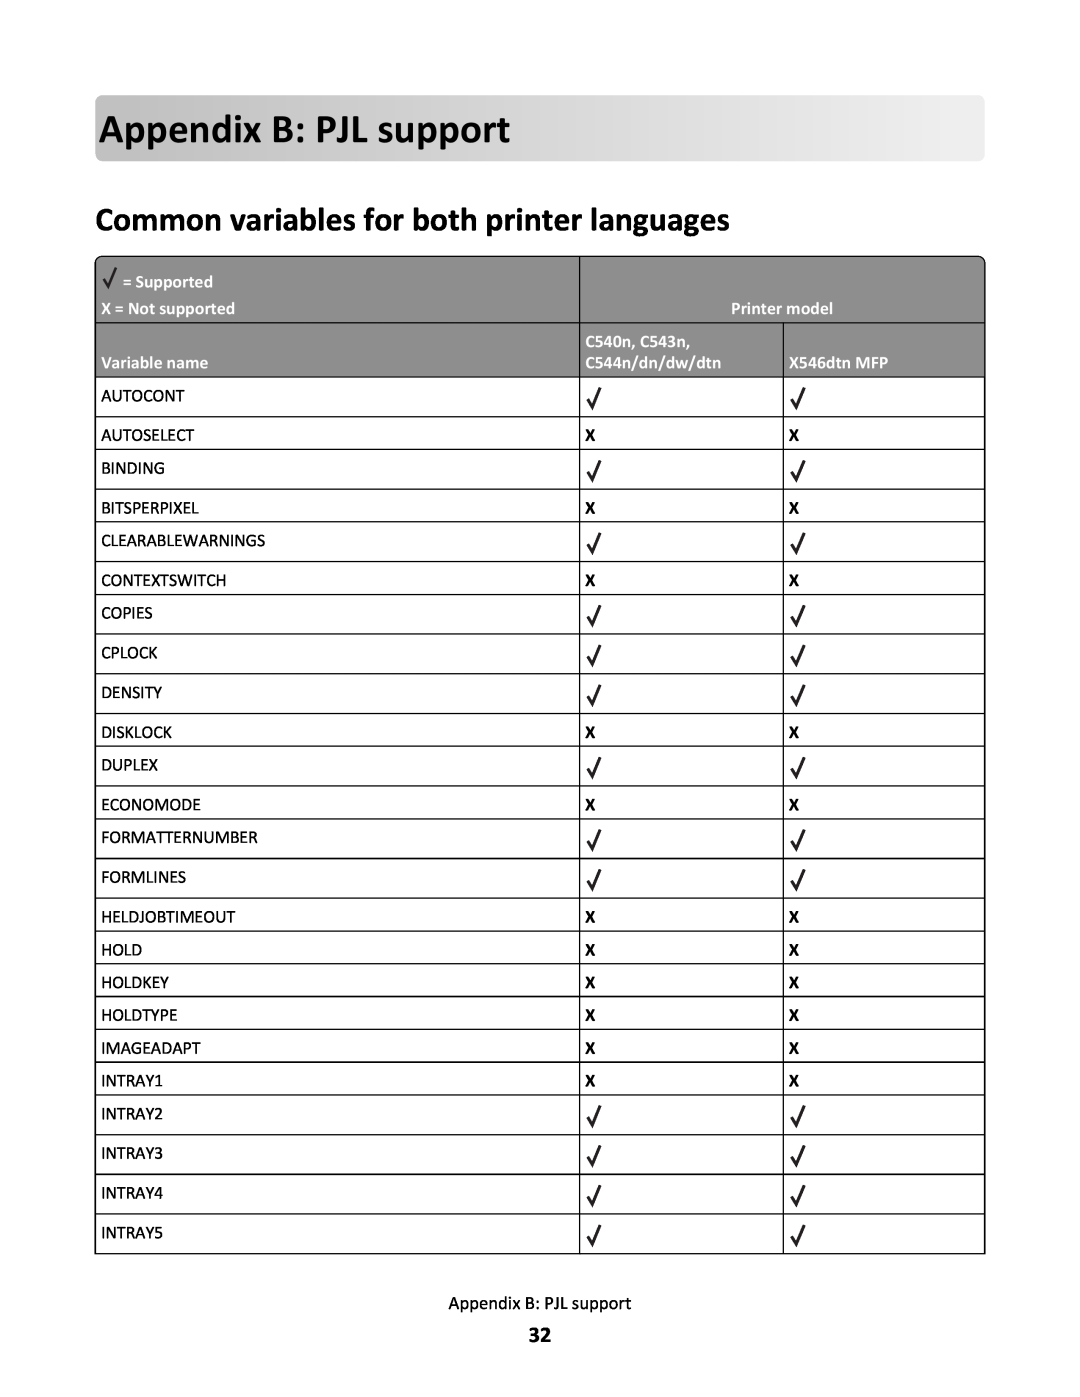 Lexmark C544N/DN/DW/DTN Appendix BPJLsupport, Common variables for both printer languages, = Supported, X = Not supported 